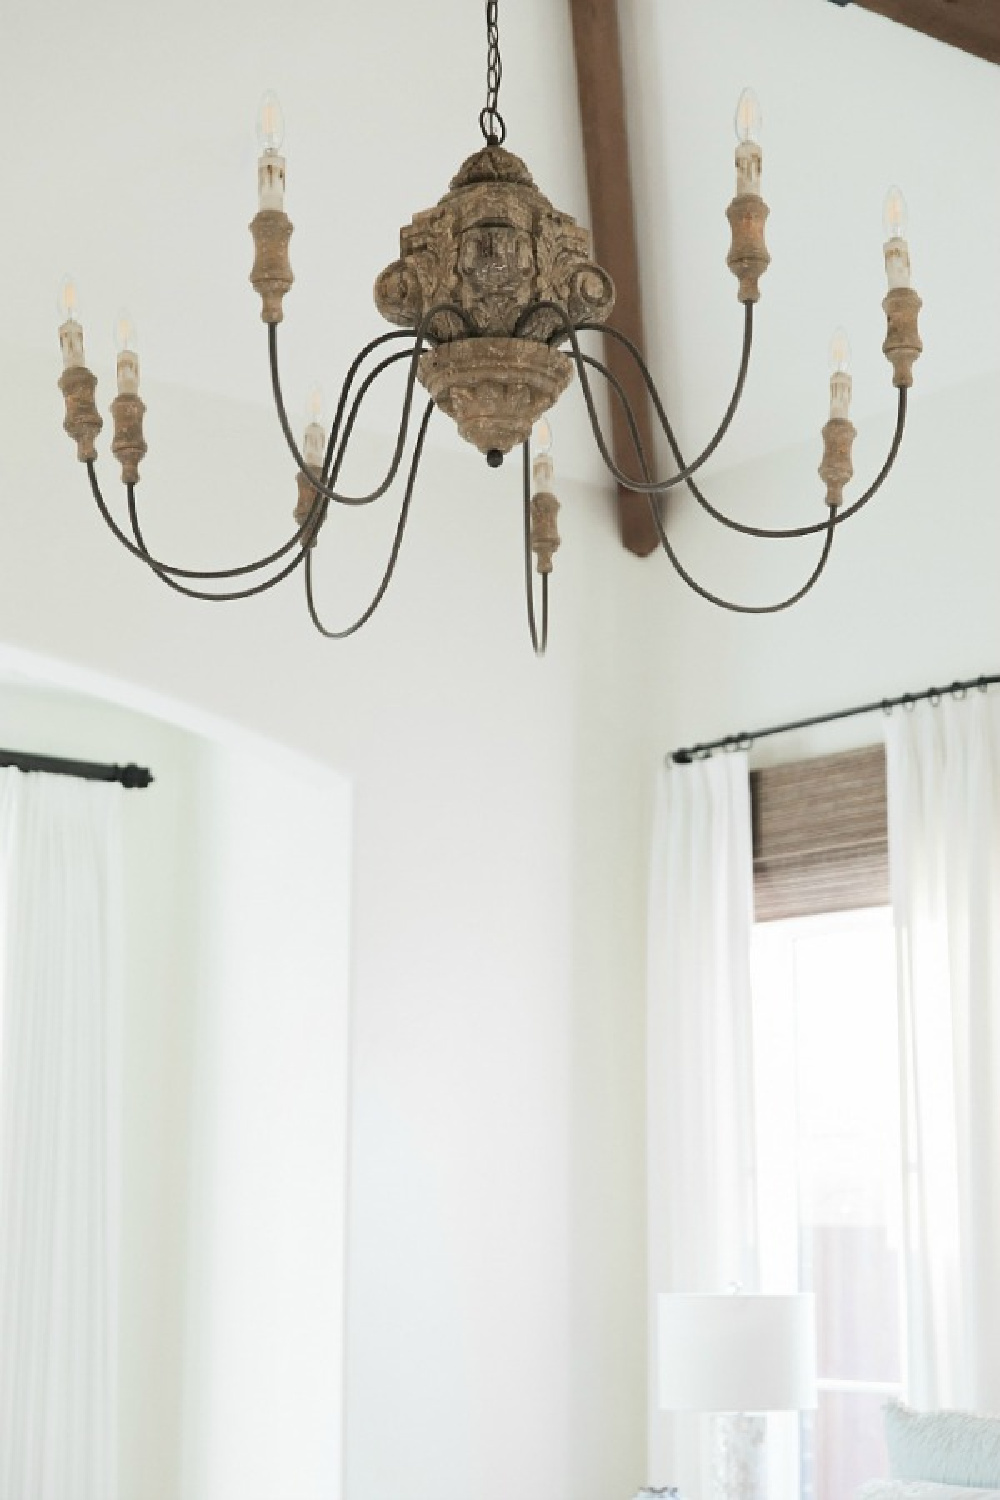 Detail of rustic French country chandelier in bedroom with Sherwin Williams Alabaster paint color. Brit Jones Design.